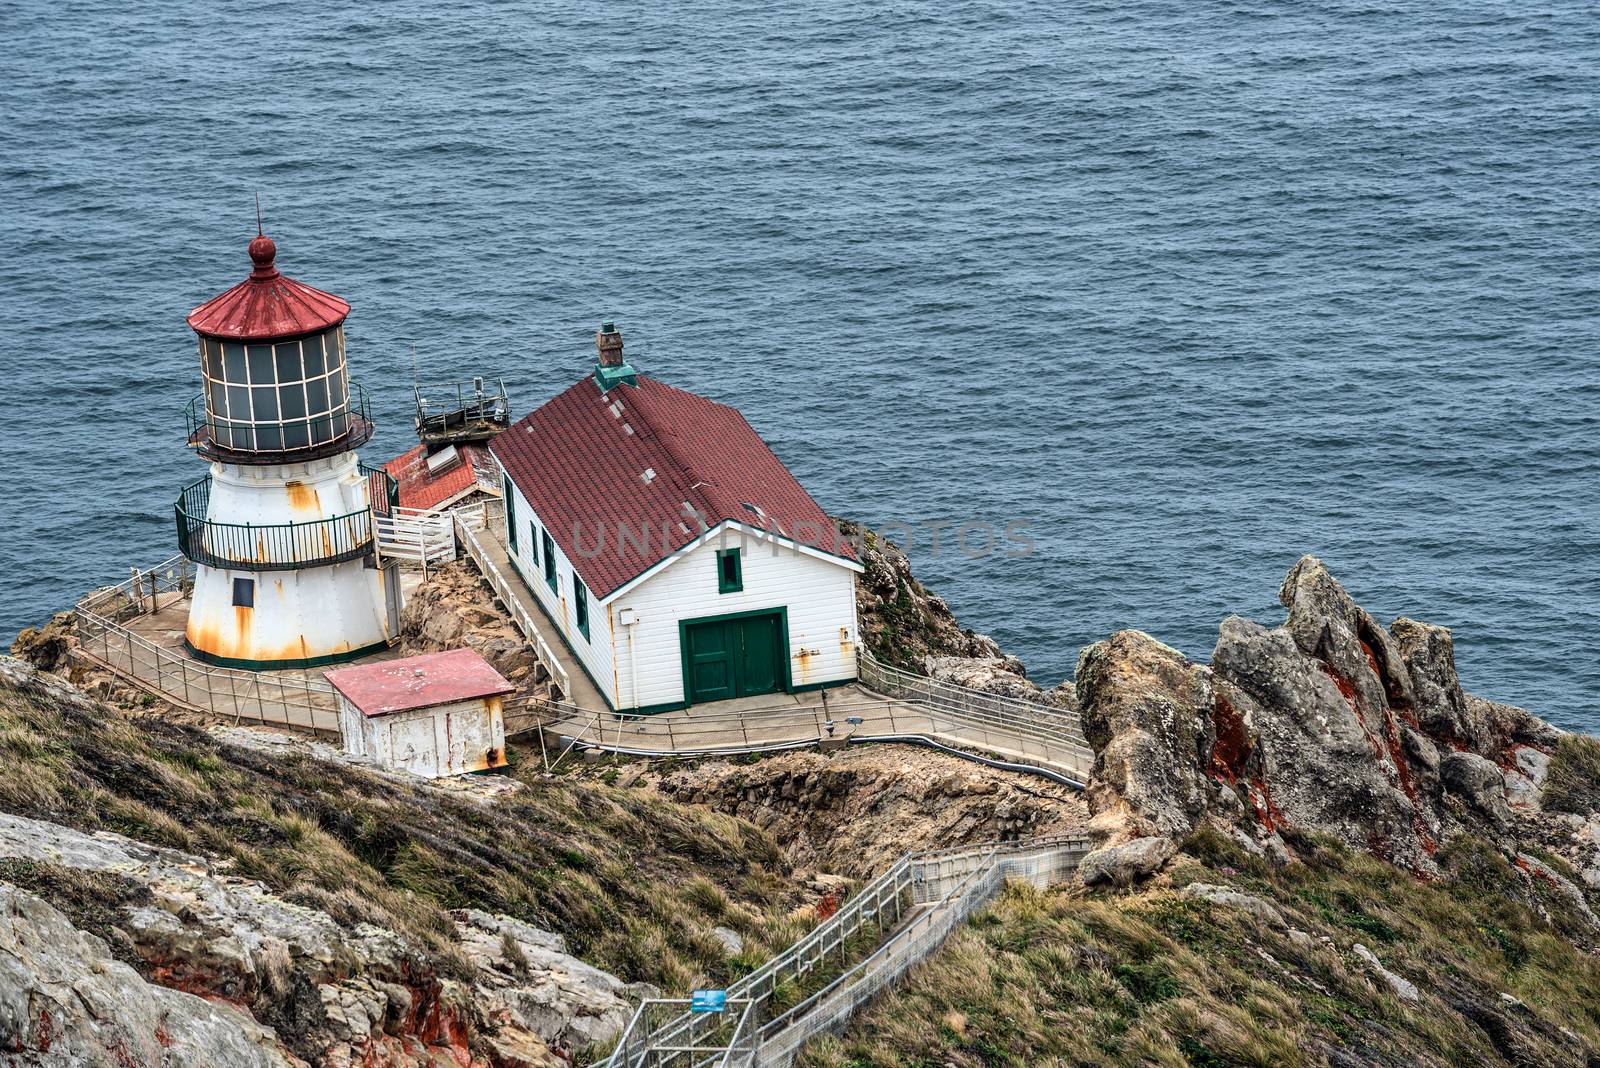 Point Reyes Lighthouse at the Point Reyes National Seashore, California